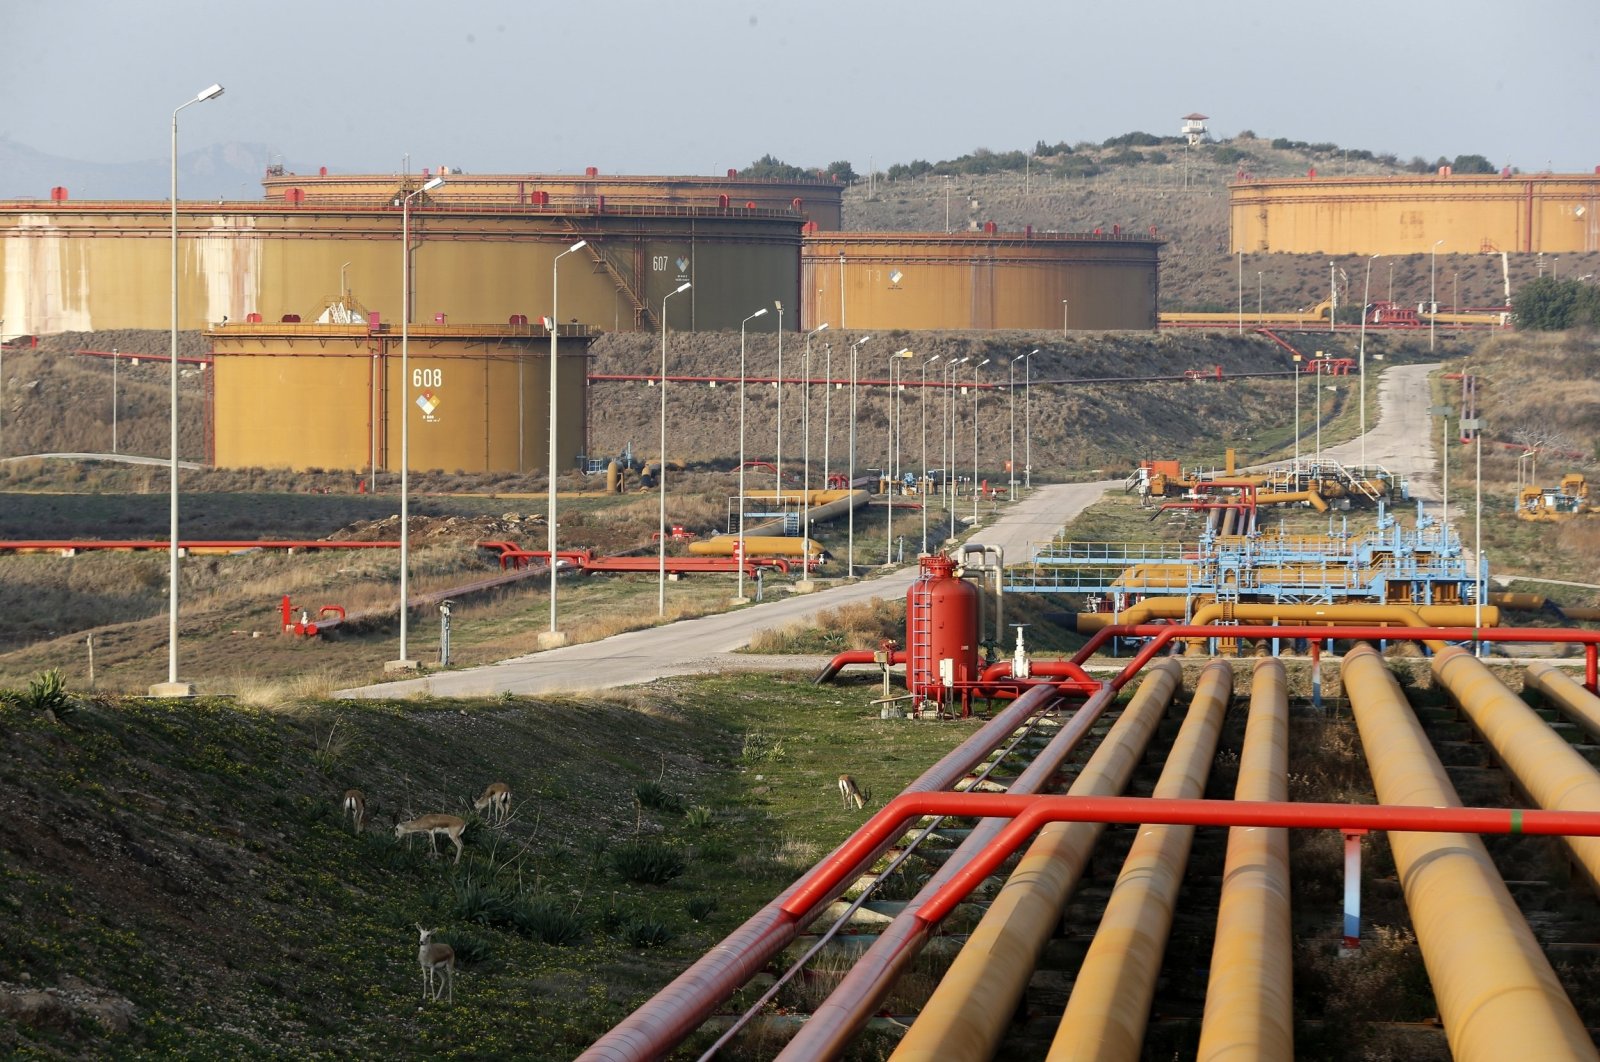 A general view of oil tanks at the Mediterranean port of Ceyhan, some 70 km (43.5 miles) from Adana, Türkiye, Feb. 19, 2014. (Reuters Photo)